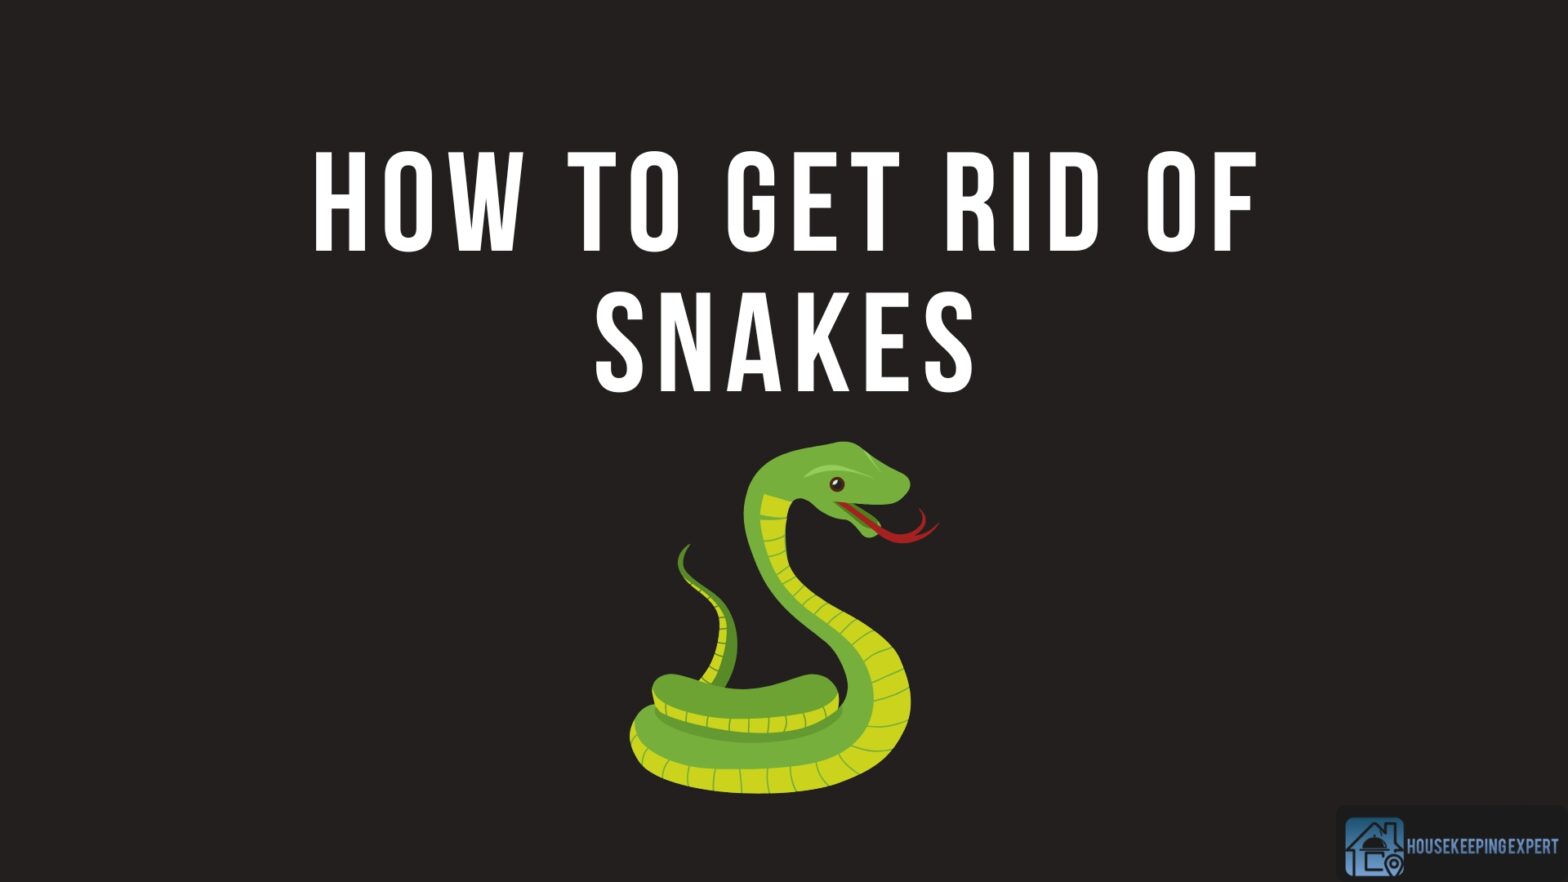 How To Get Rid Of Snakes